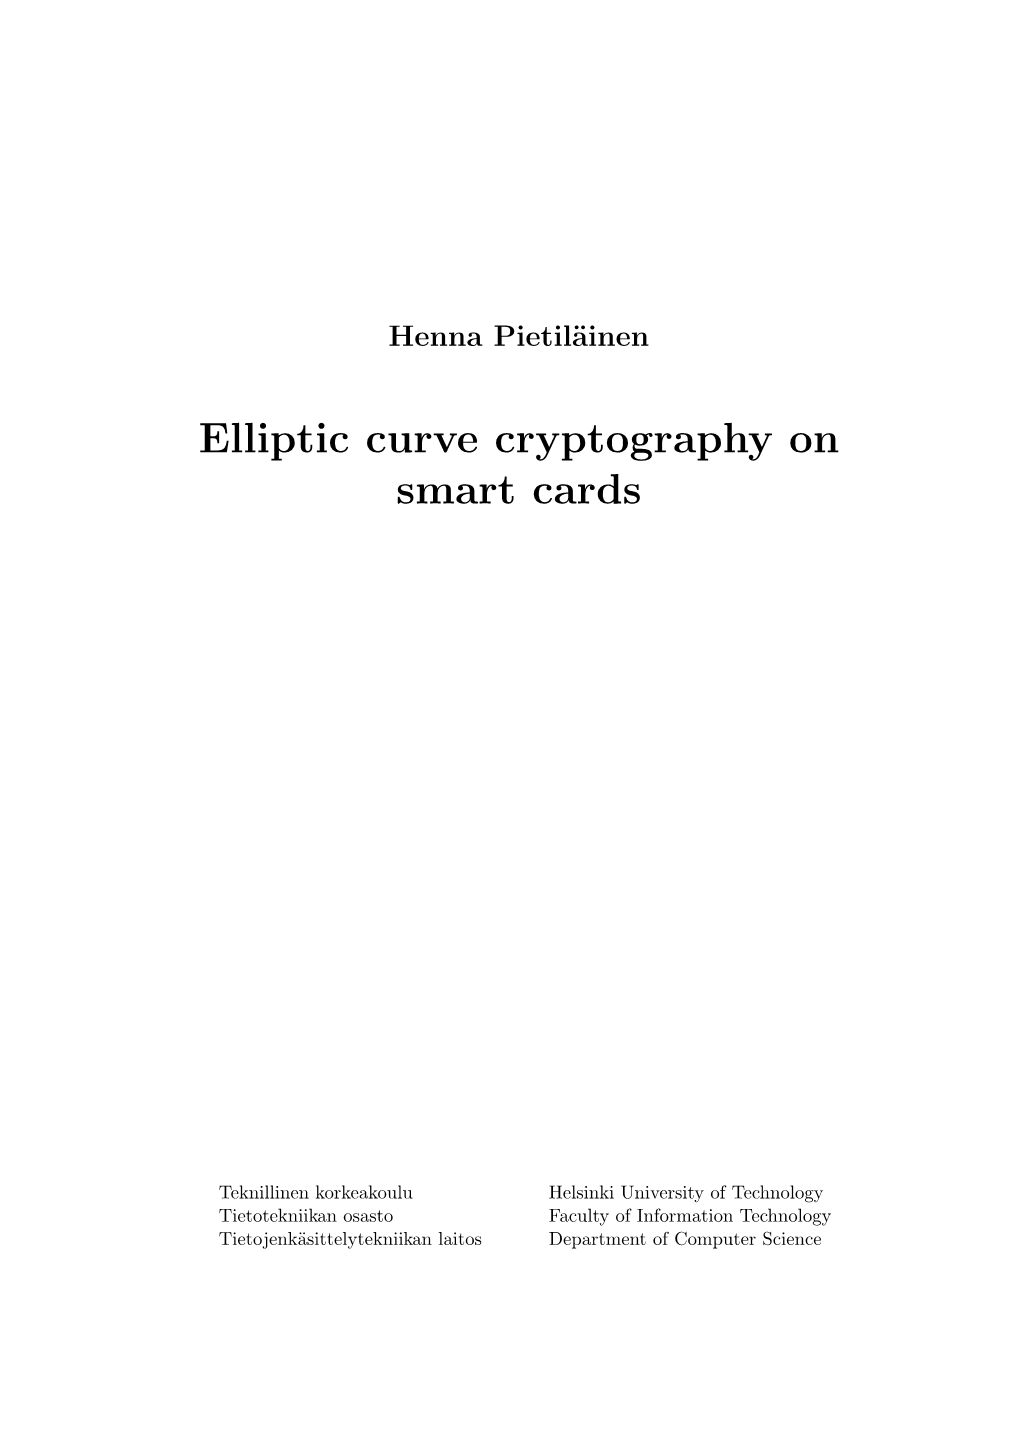 Elliptic Curve Cryptography on Smart Cards